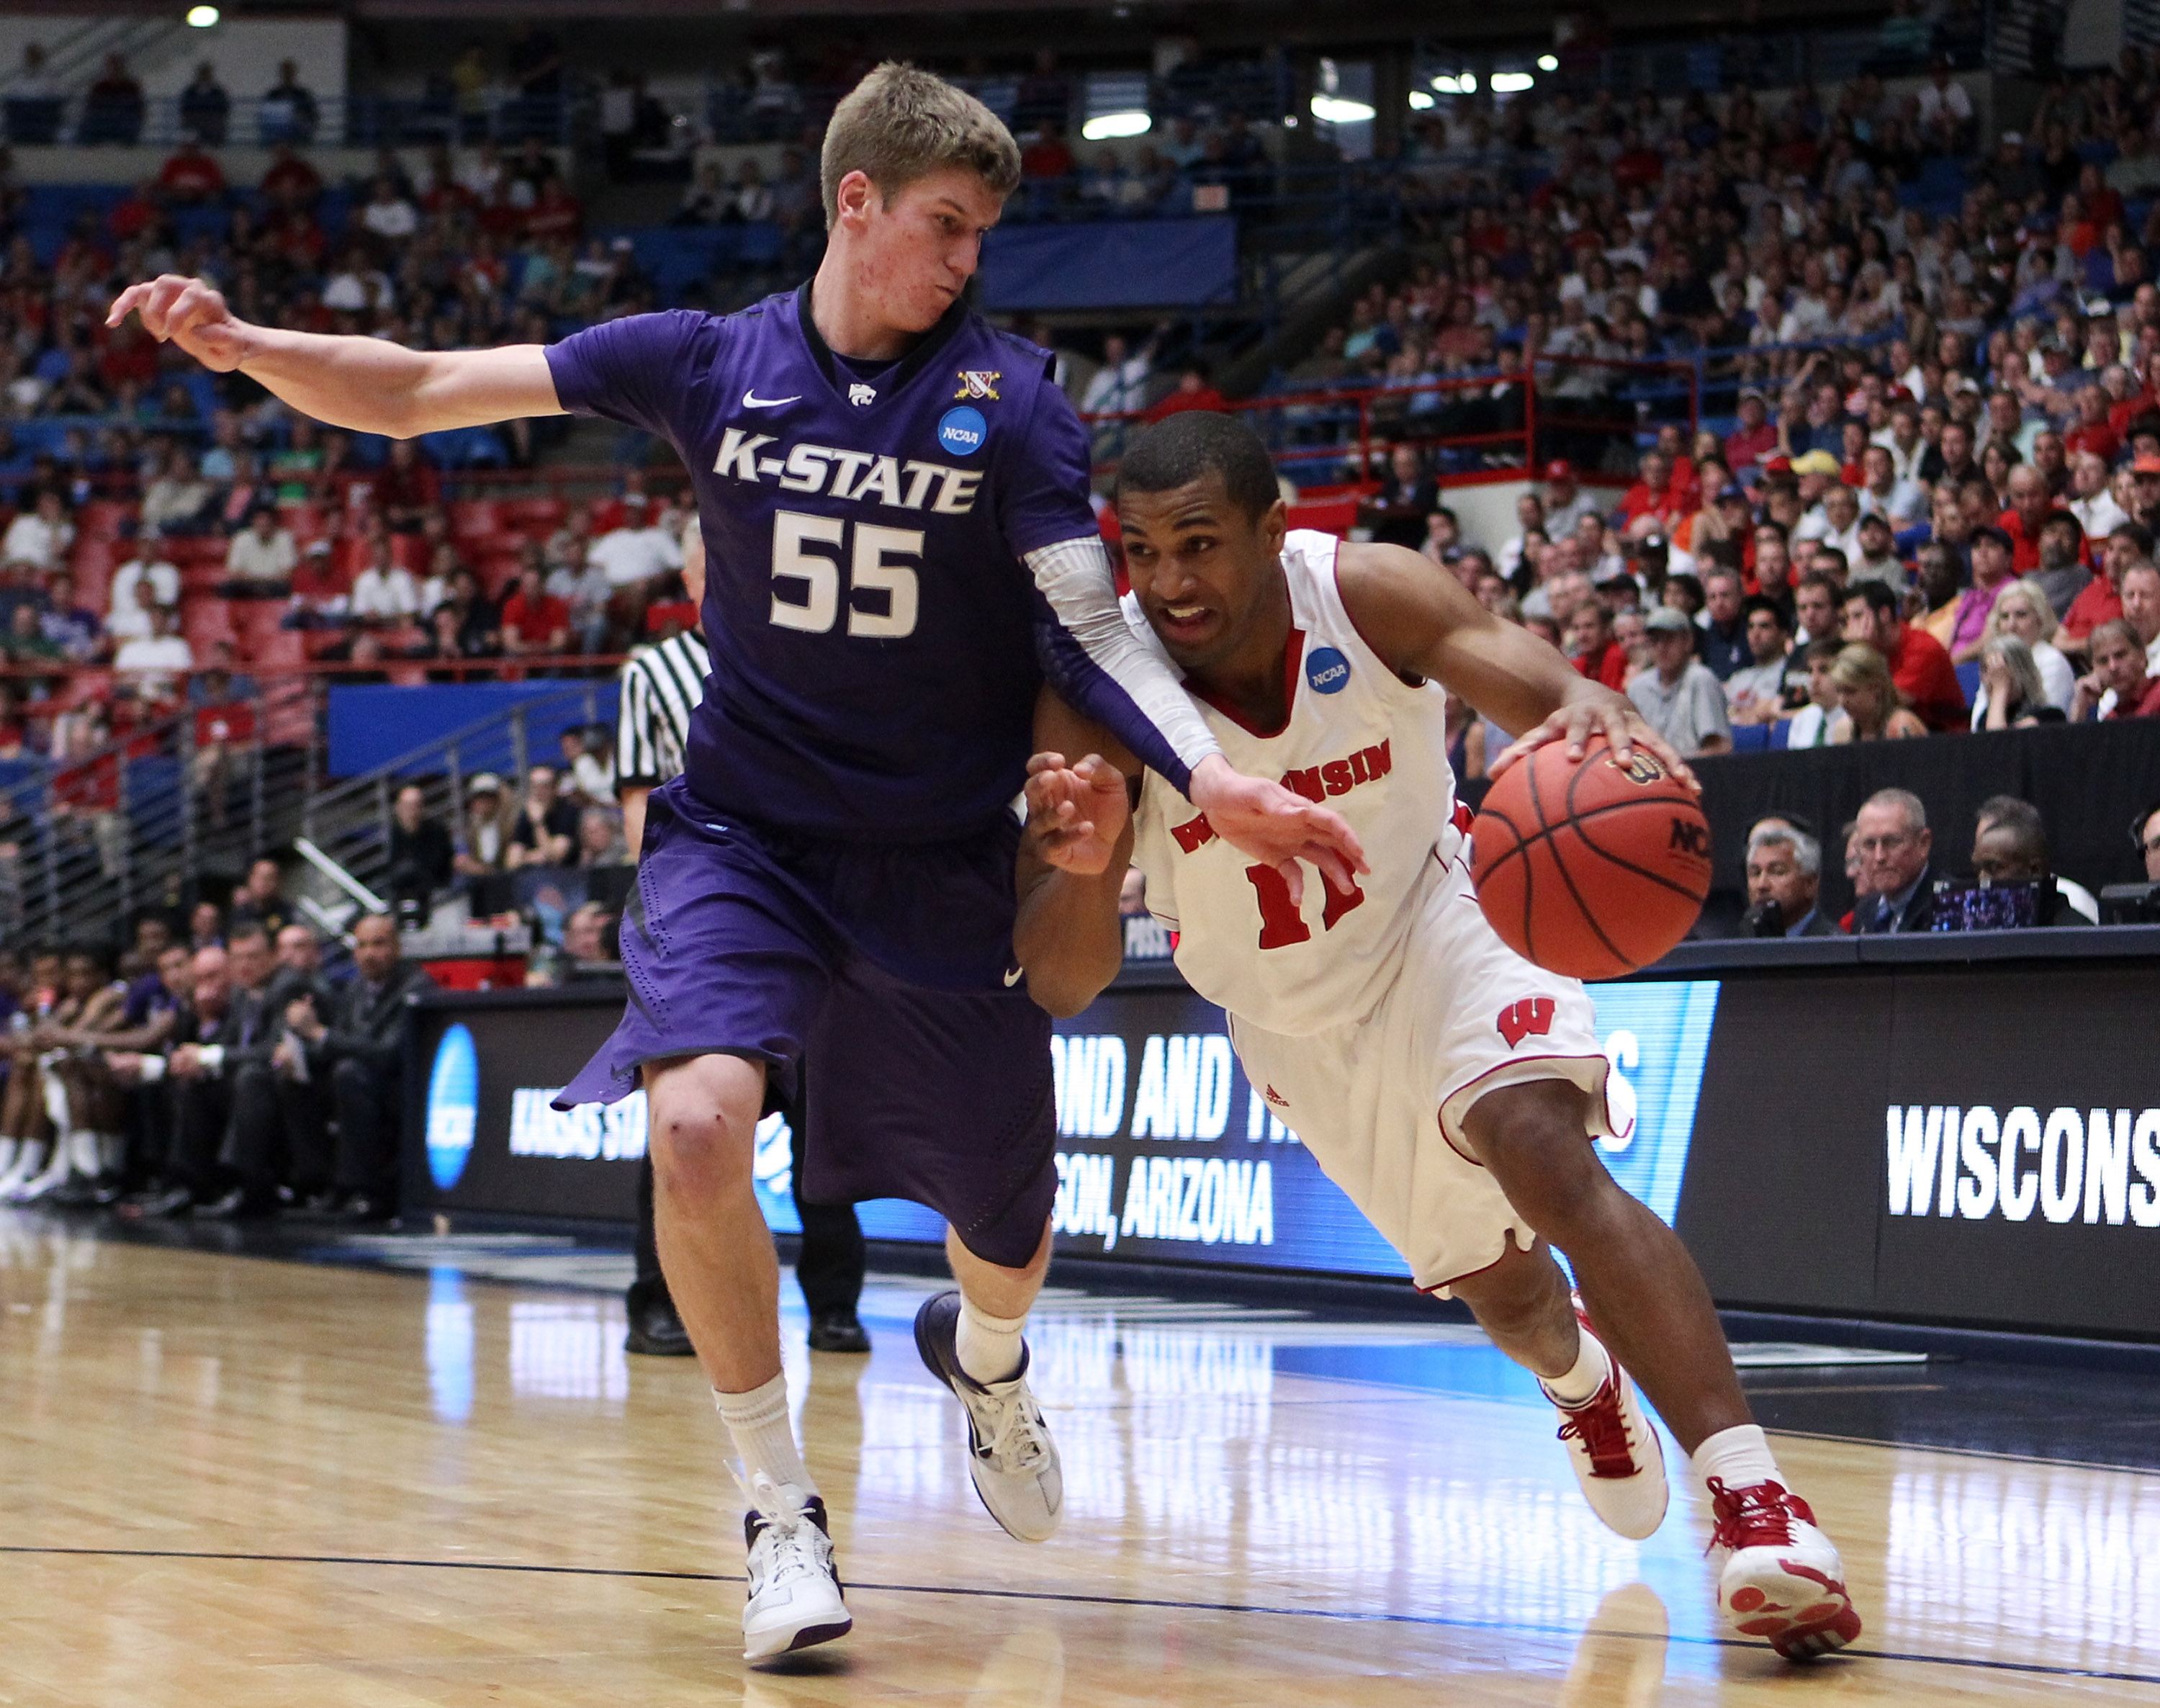 TUCSON, AZ - MARCH 19:  Jordan Taylor #11 of the Wisconsin Badgers drives past Will Spradling #55 of the Kansas State Wildcats during the third round of the 2011 NCAA men's basketball tournament at McKale Center on March 19, 2011 in Tucson, Arizona.  (Pho